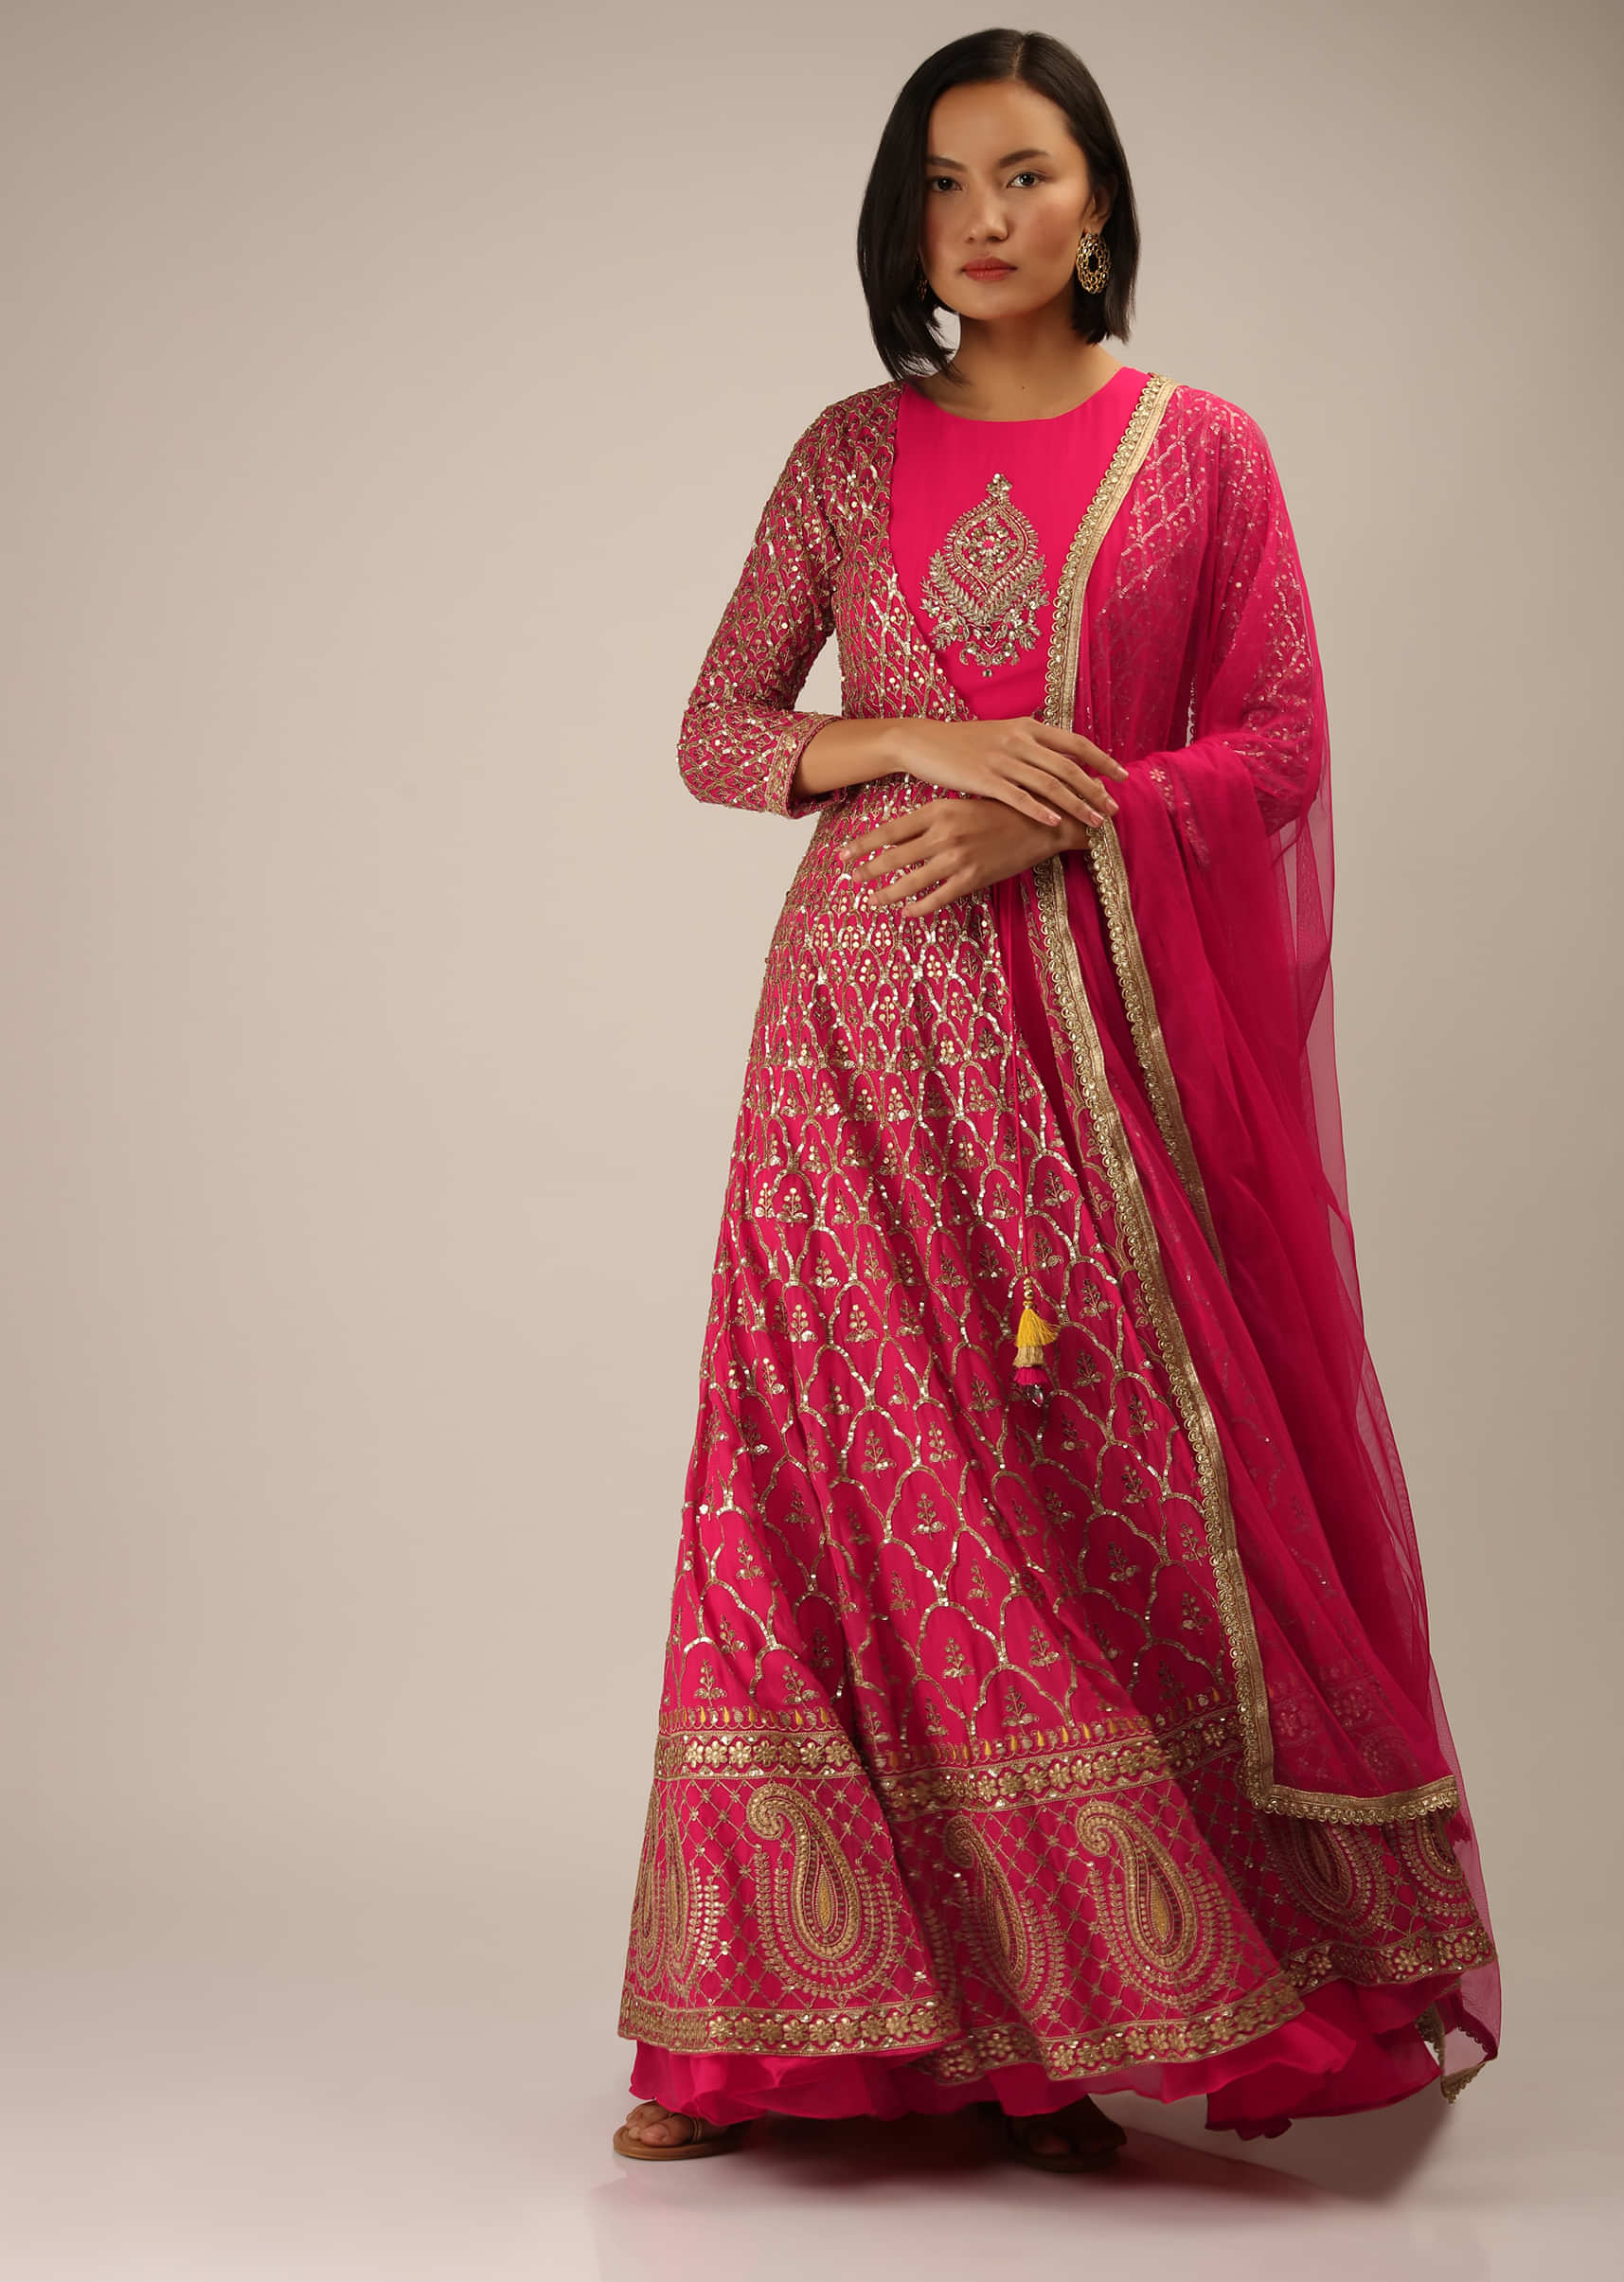 Hot Pink Floor Length Jacket Suit With Zari And Sequins Embroidered Moroccan Jaal